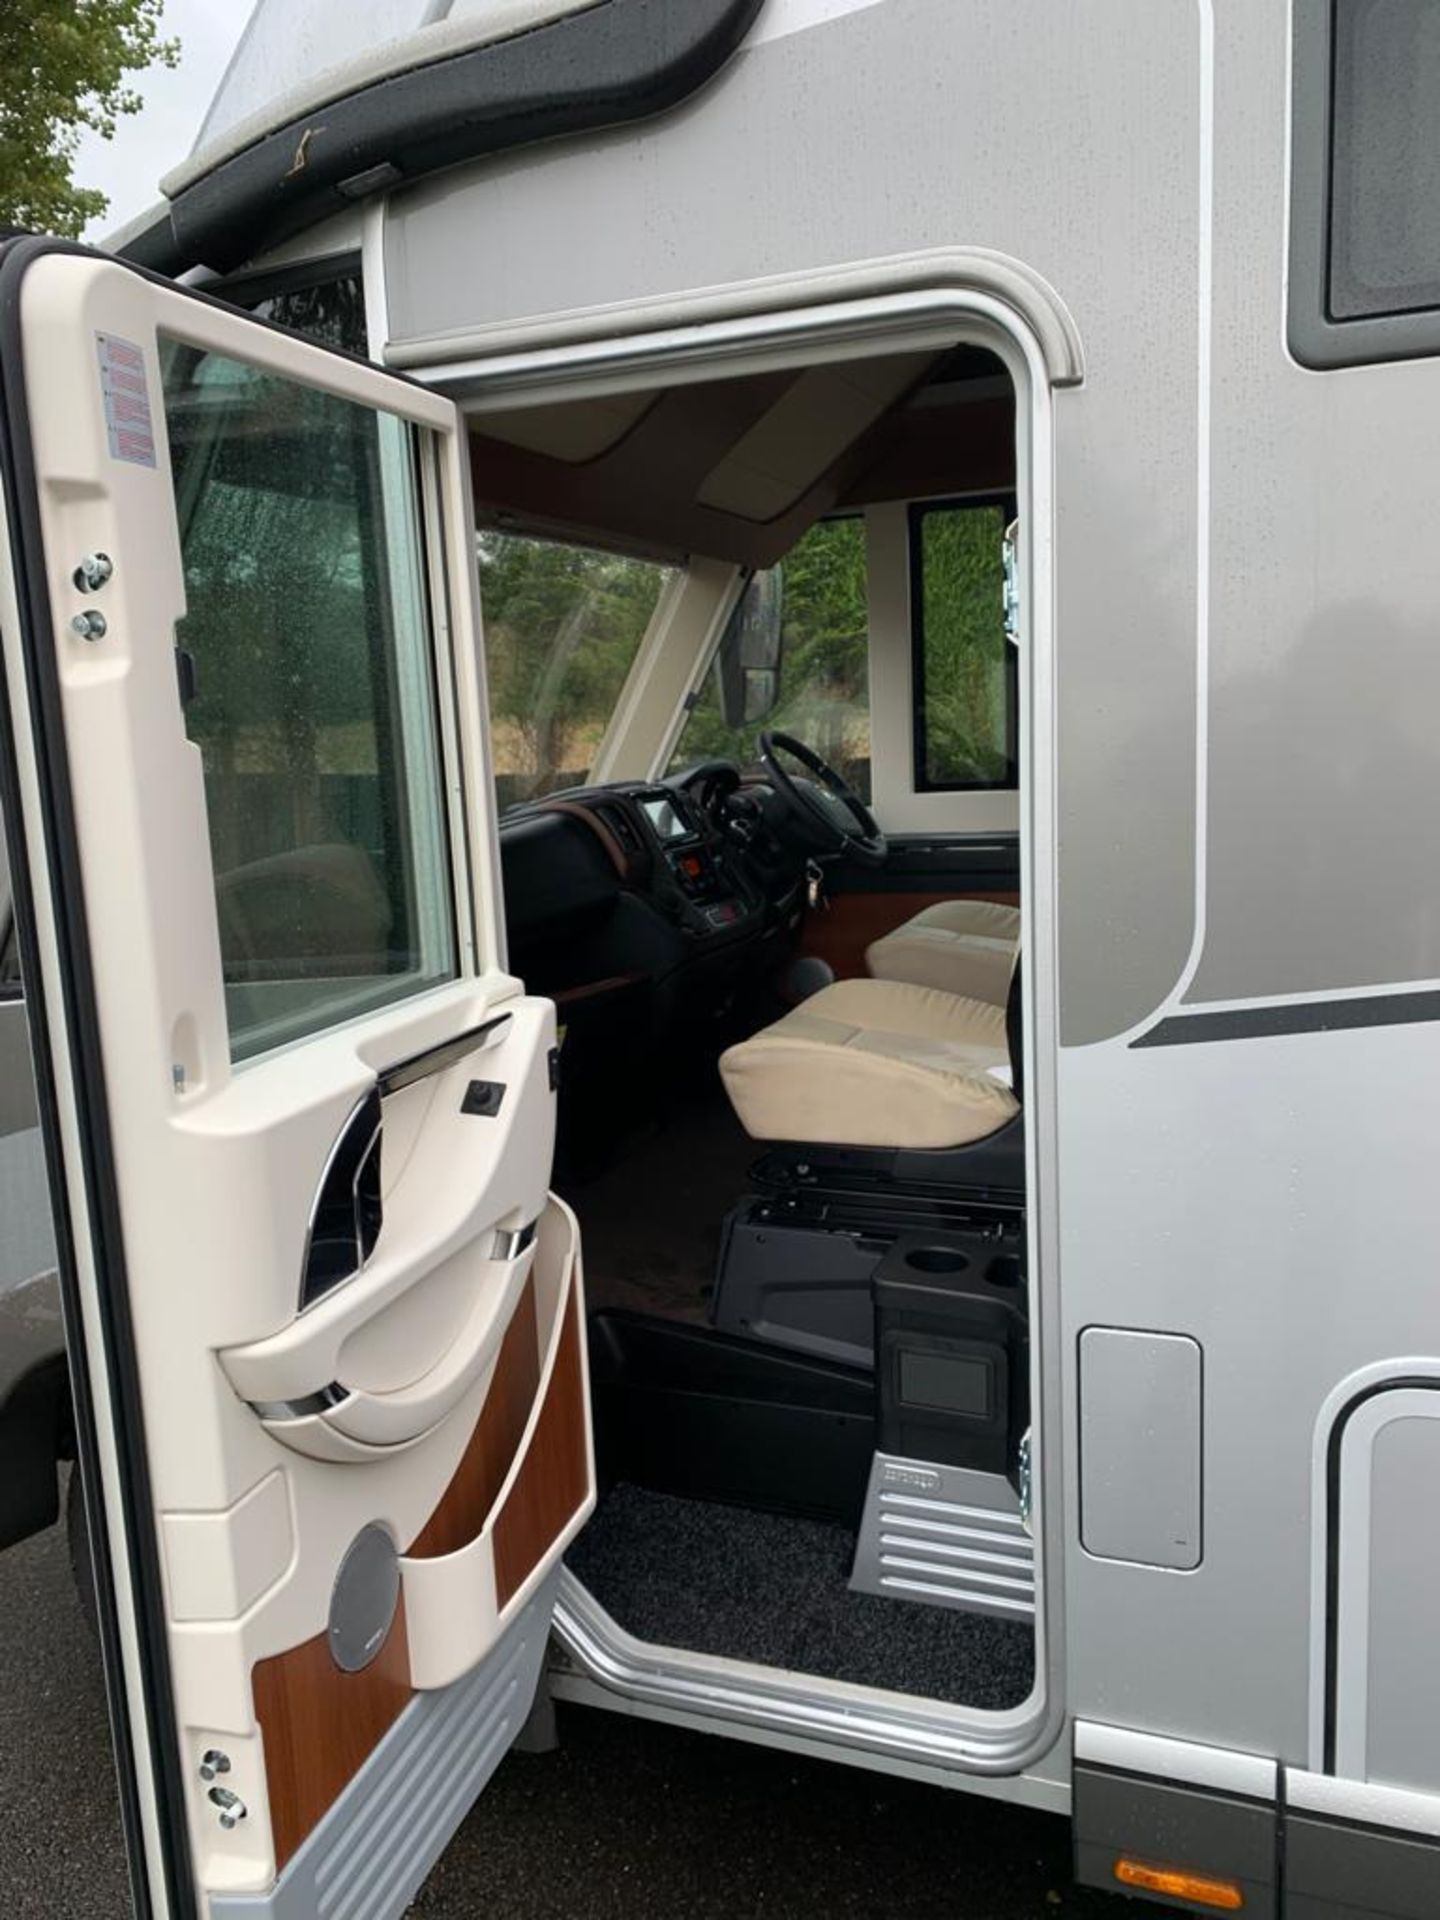 2020 CARTHAGO LINER-FOR-TWO 53L MOTORHOME 11 mths WARRANTY 4529 MILES, MINT CONDITION NO VAT - Image 10 of 38